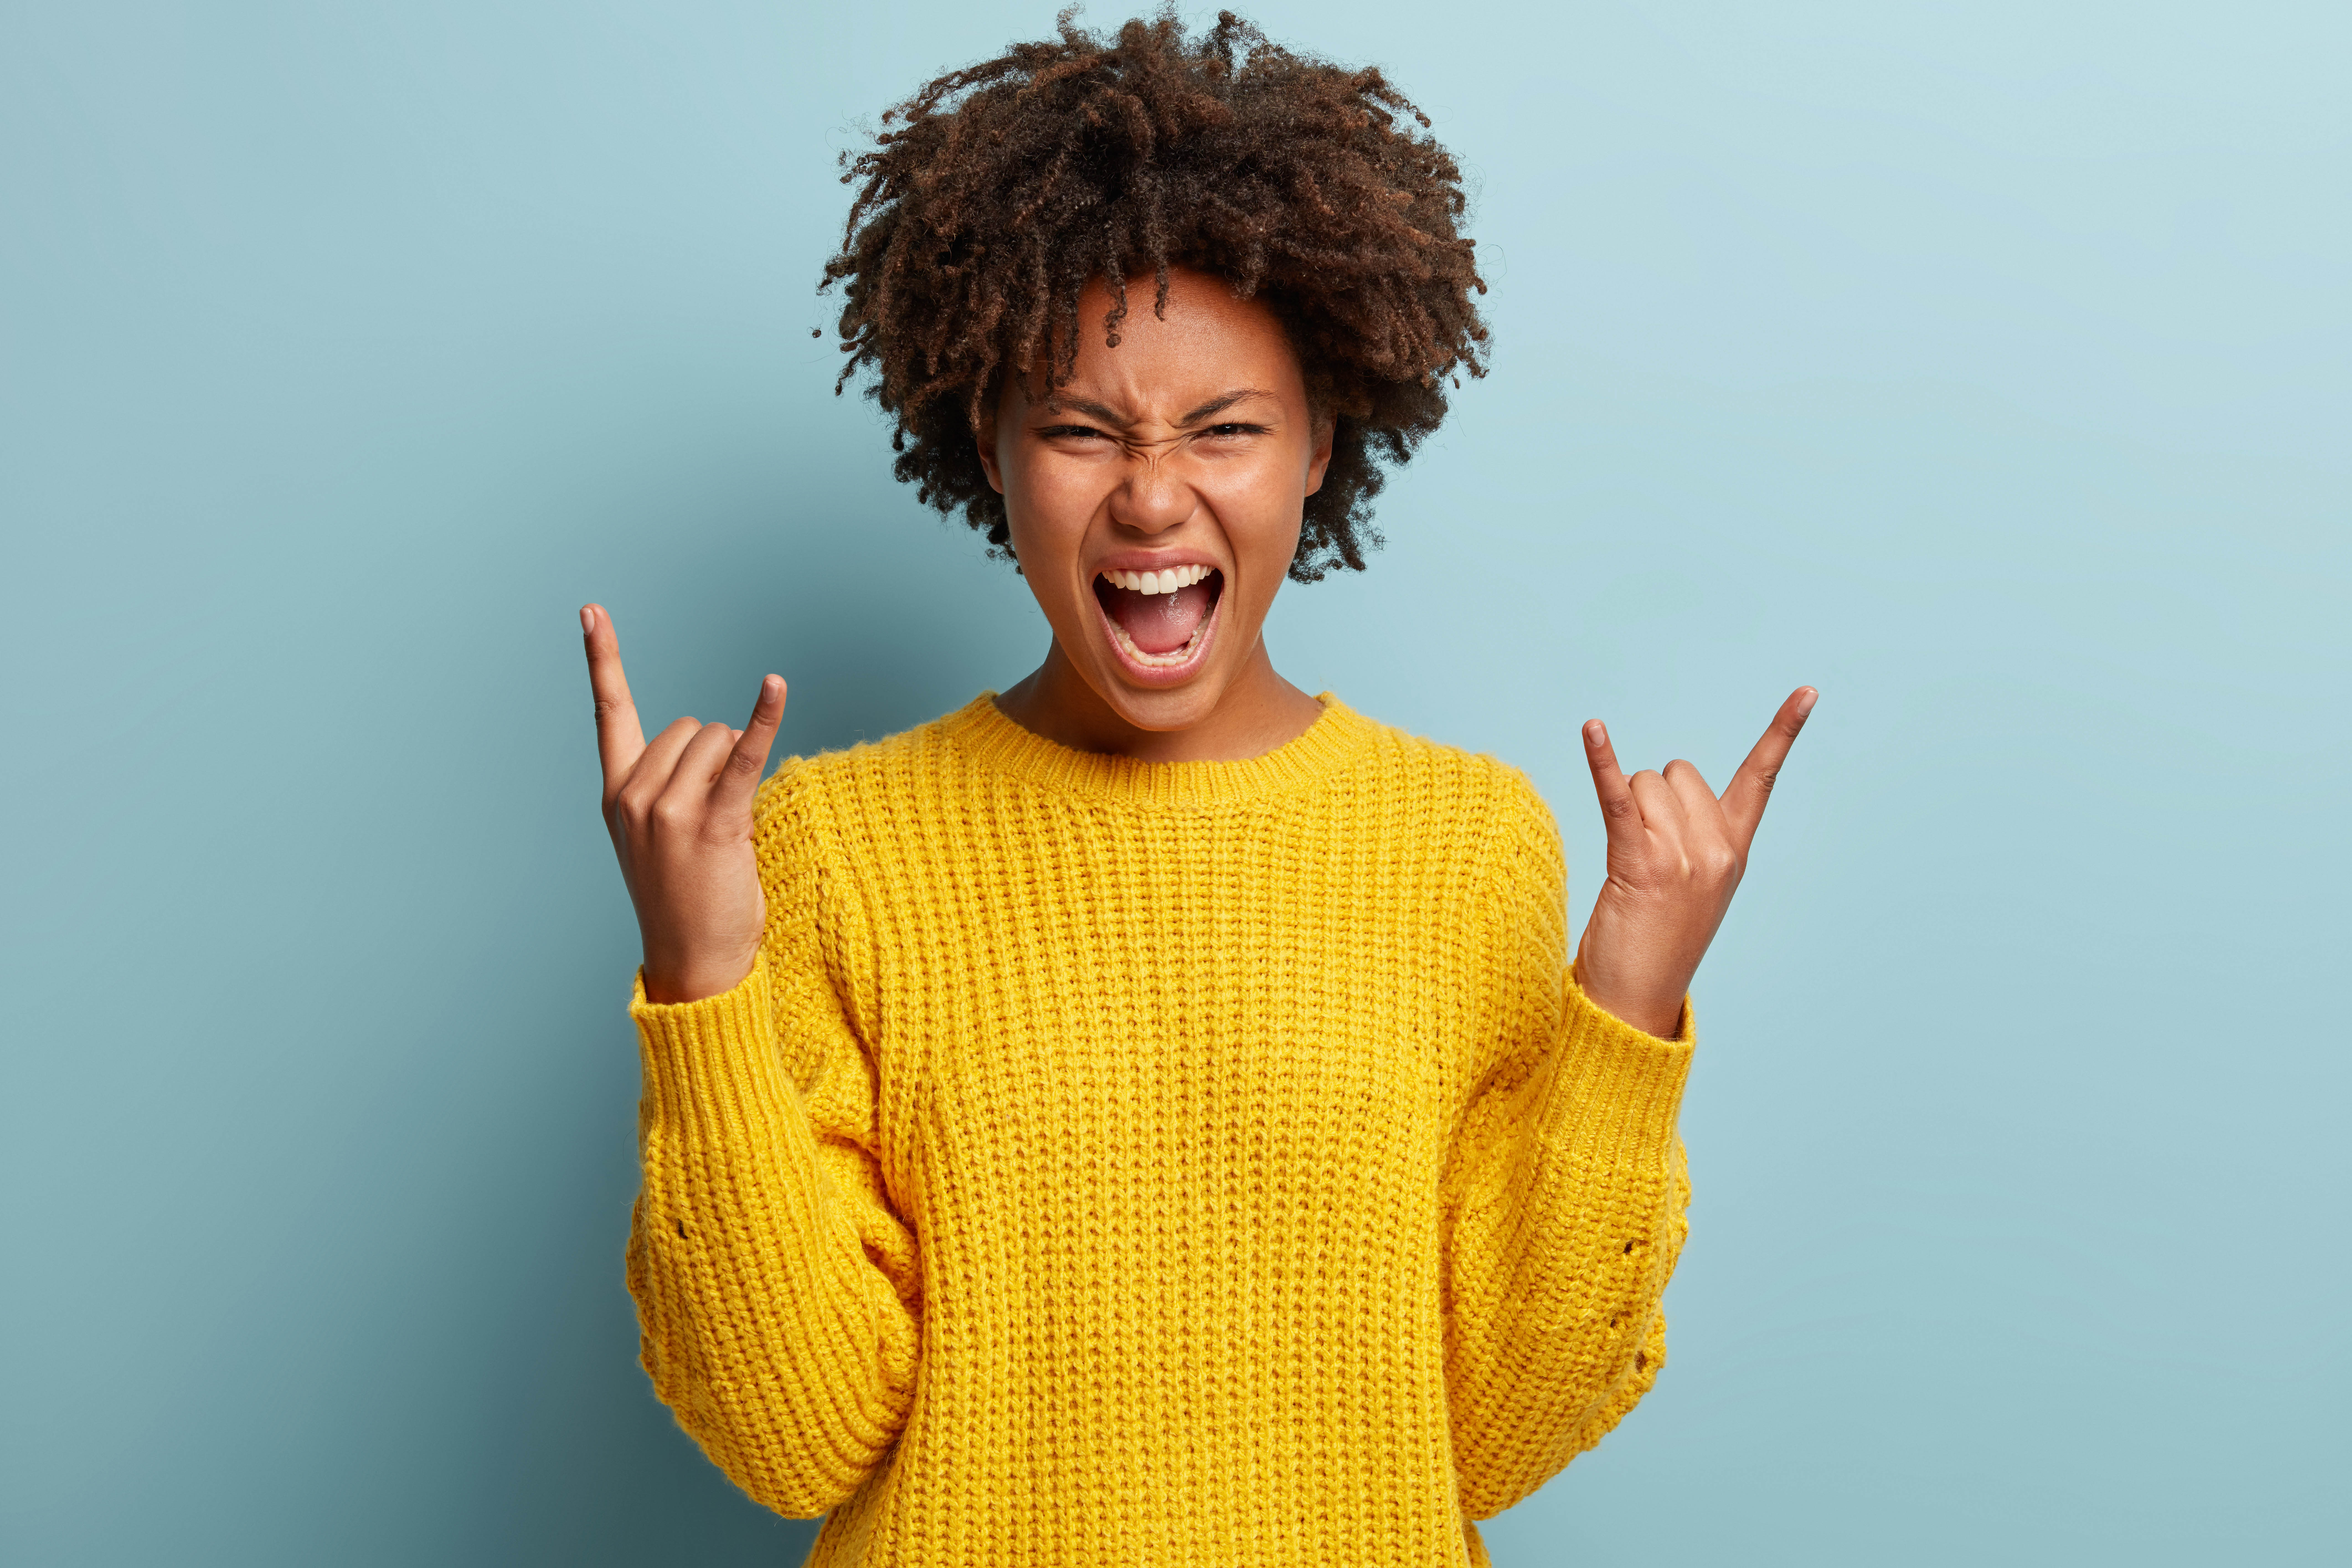 Excited black woman in a bright yellow sweater